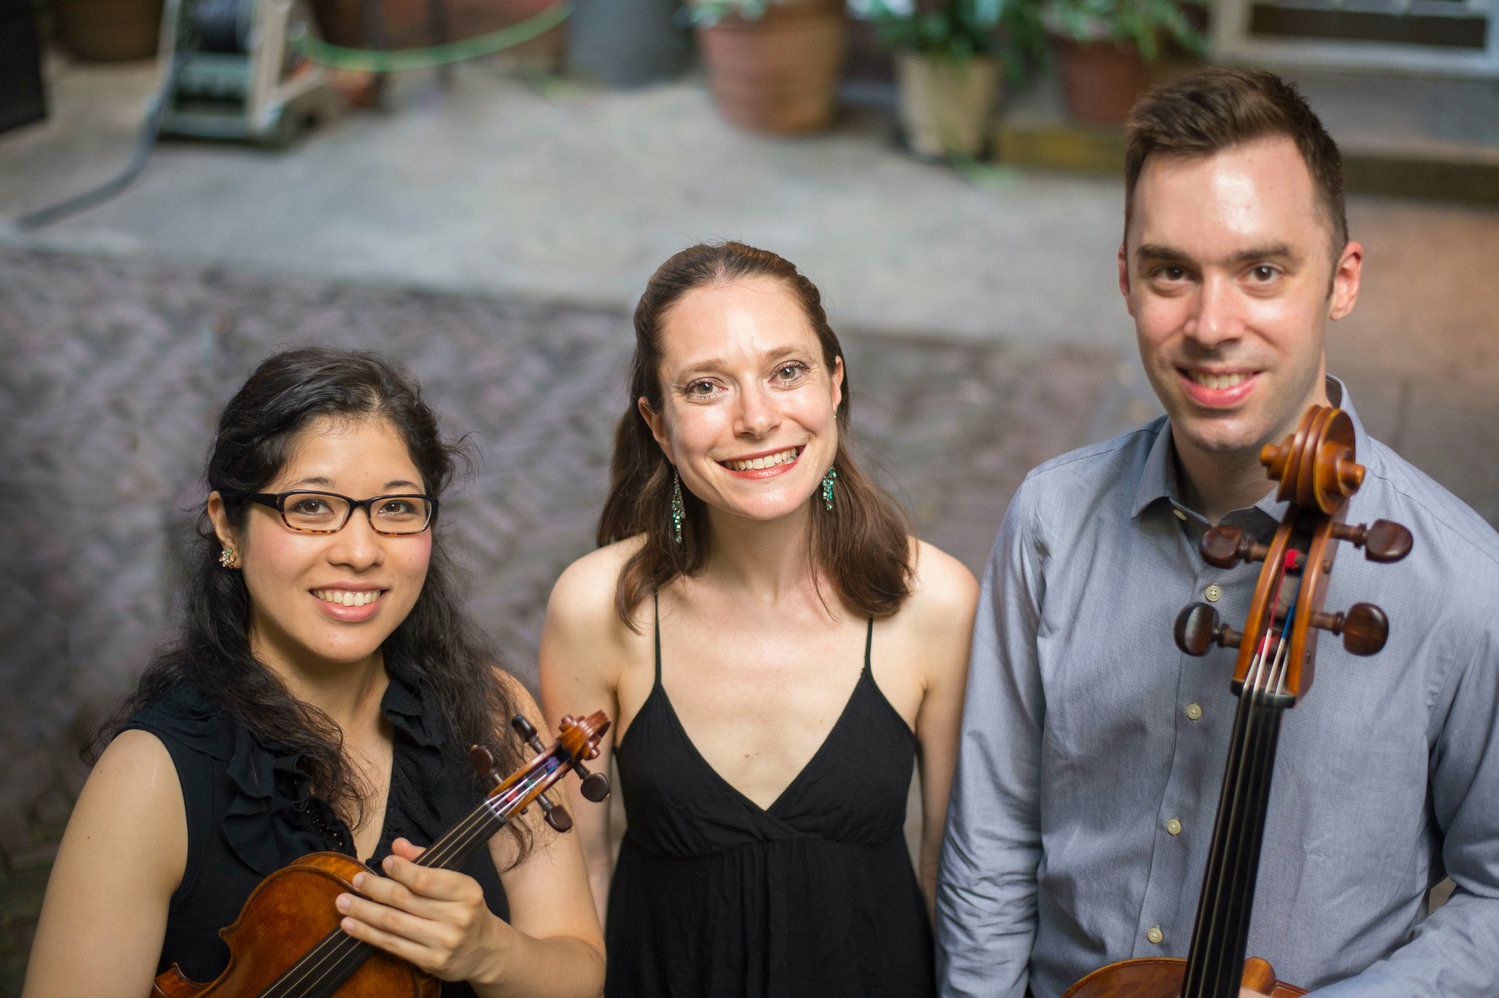 Emilie-Anne Gendron (violin), left; Melody Fader (piano) and Michael Haas (cello) will perform as the Fader-Gendron-Haas Trio at the Shandelee Music Festival.